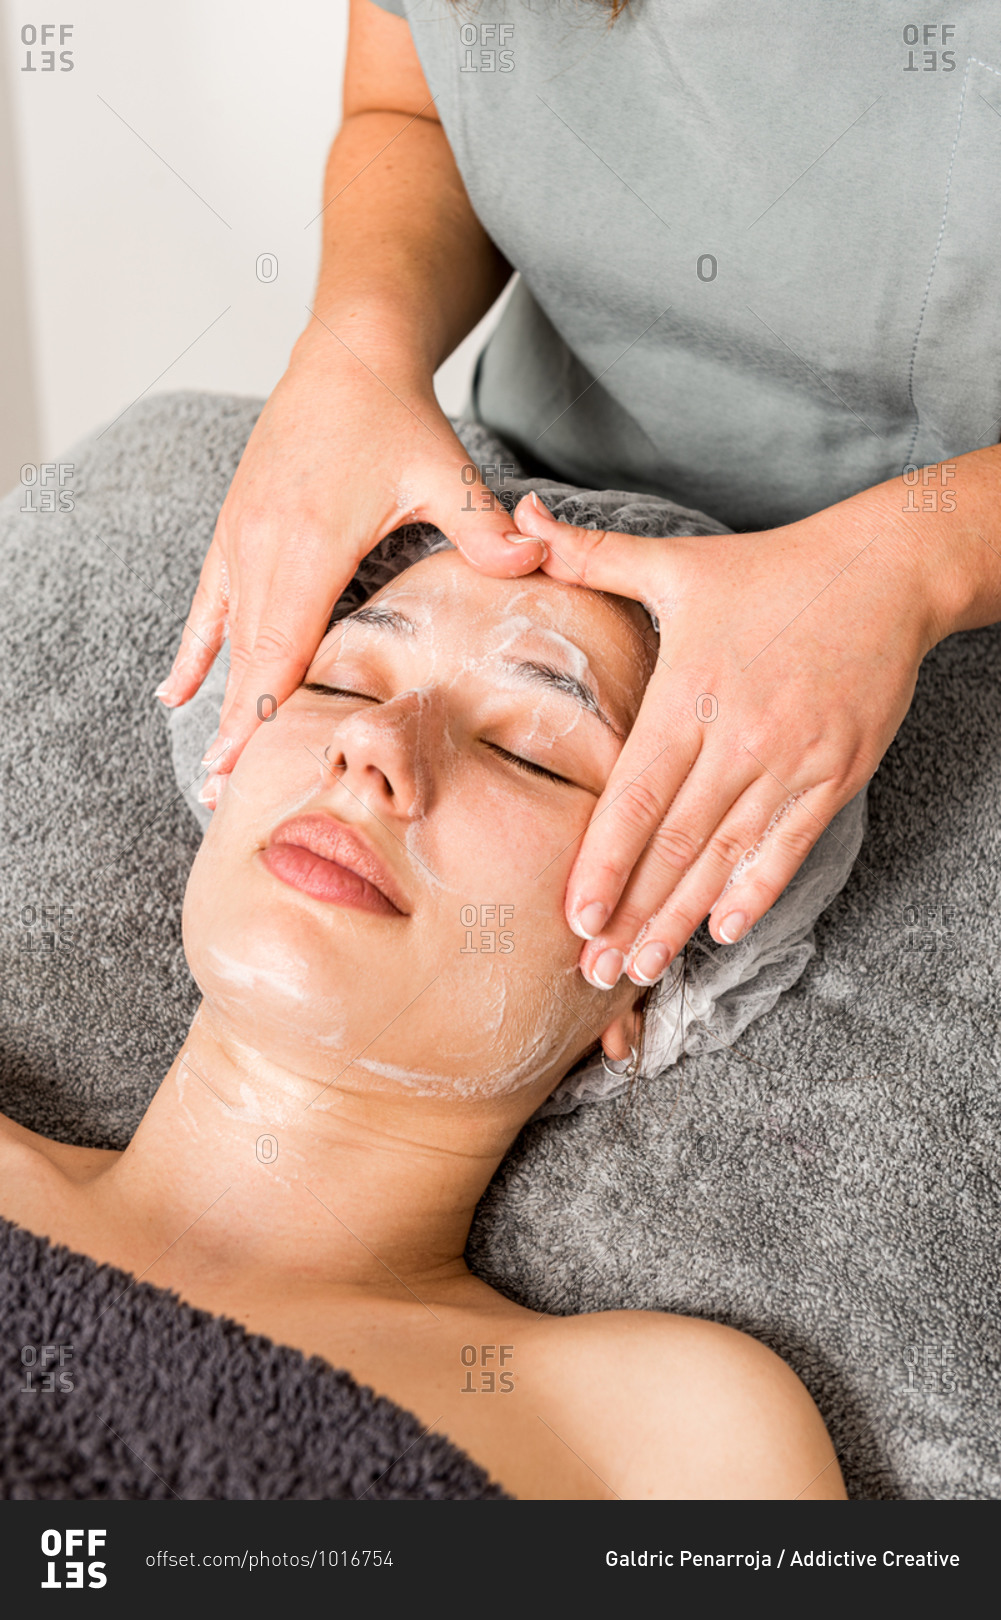 Crop anonymous cosmetician applying facial cloth mask on female client during rejuvenate skincare procedure in modern beauty salon